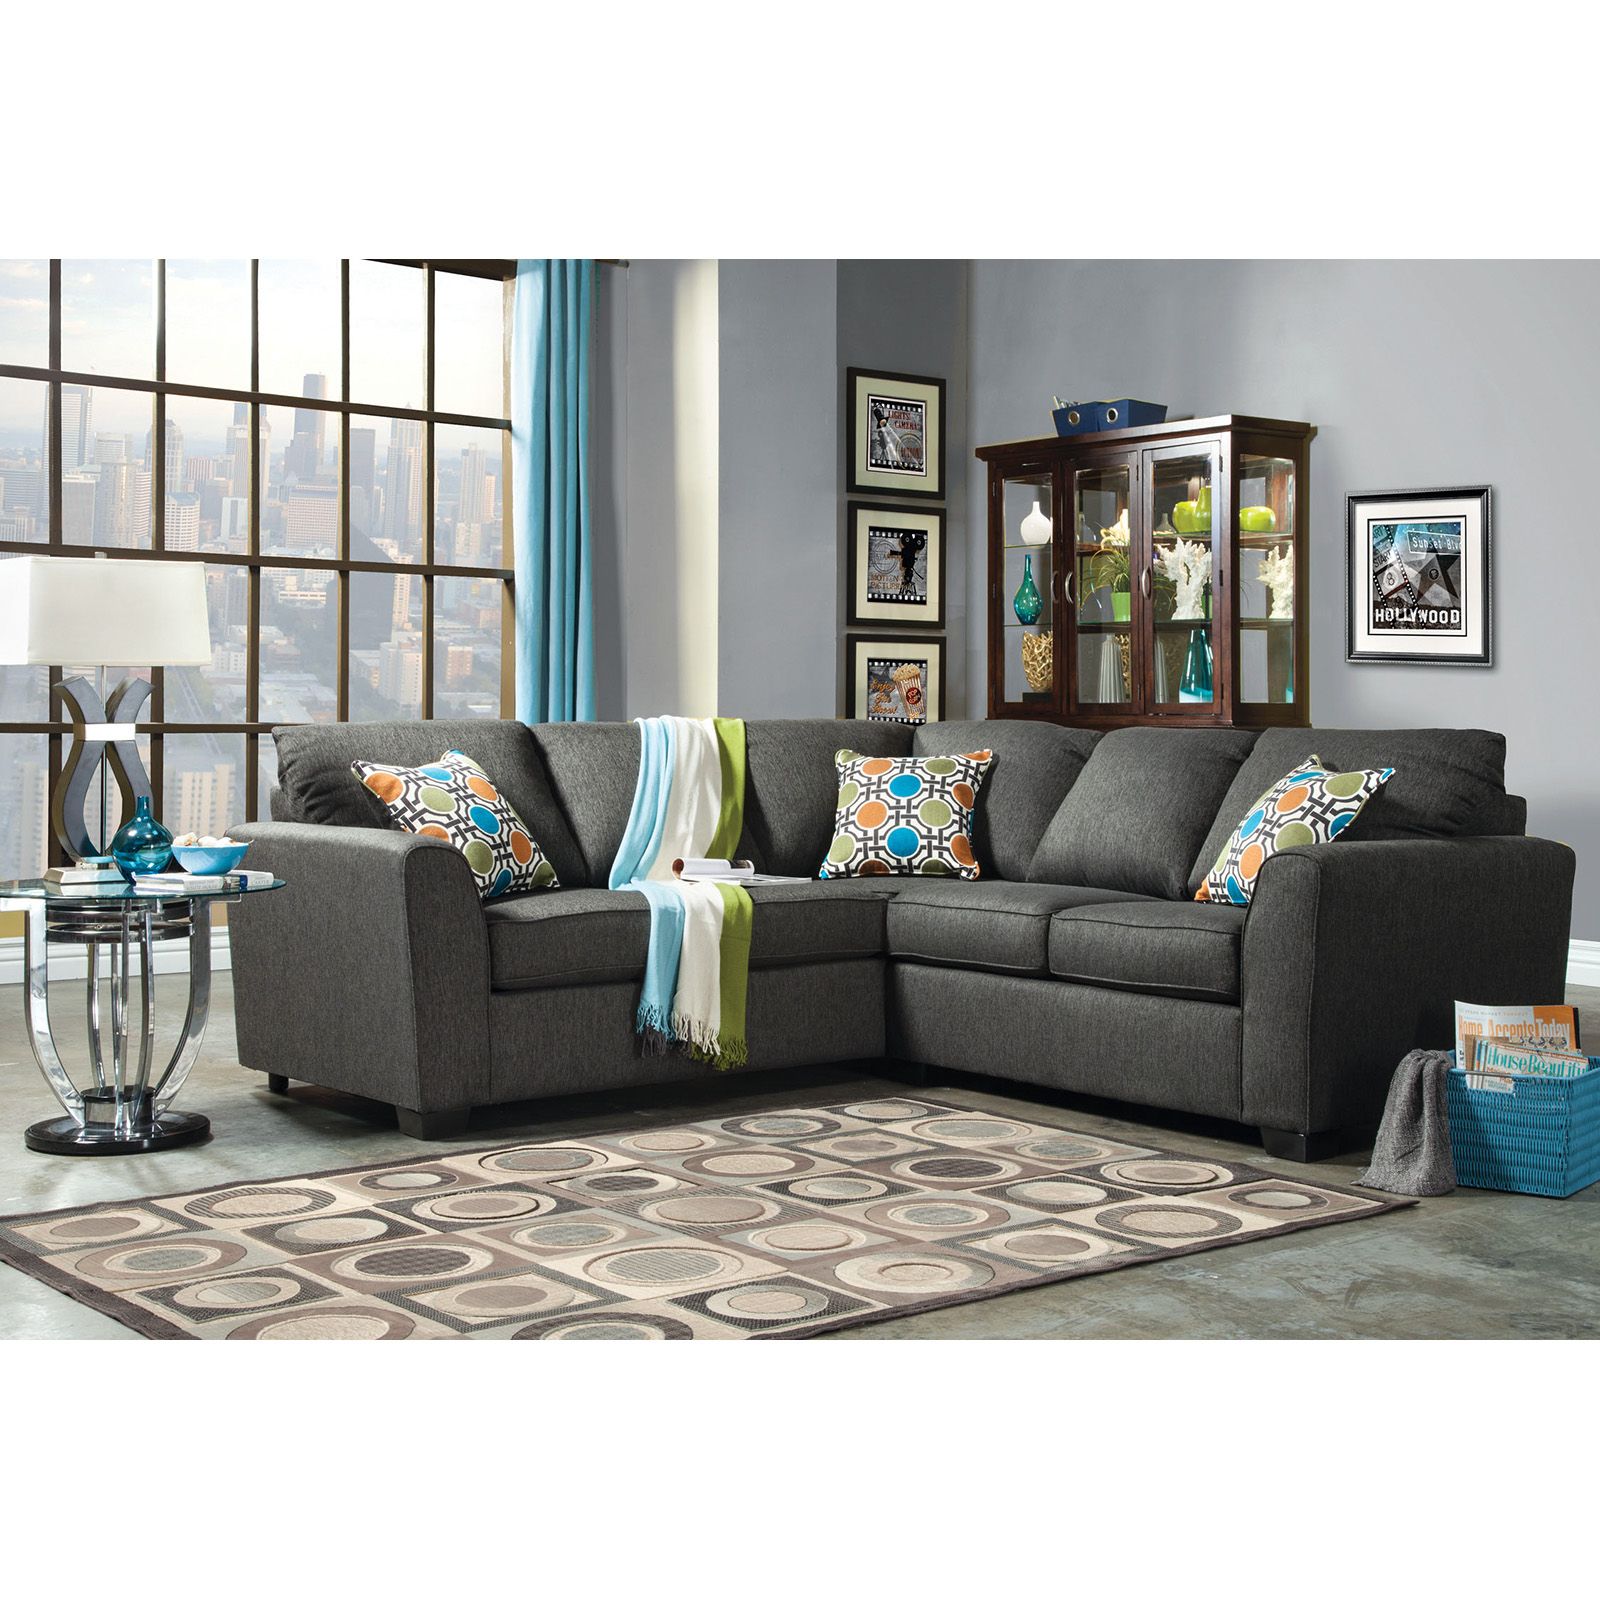 Furniture Of America Parker 2 Piece Fabric Sectional Sofa Intended For Sectional Sofas In Gray (View 7 of 15)